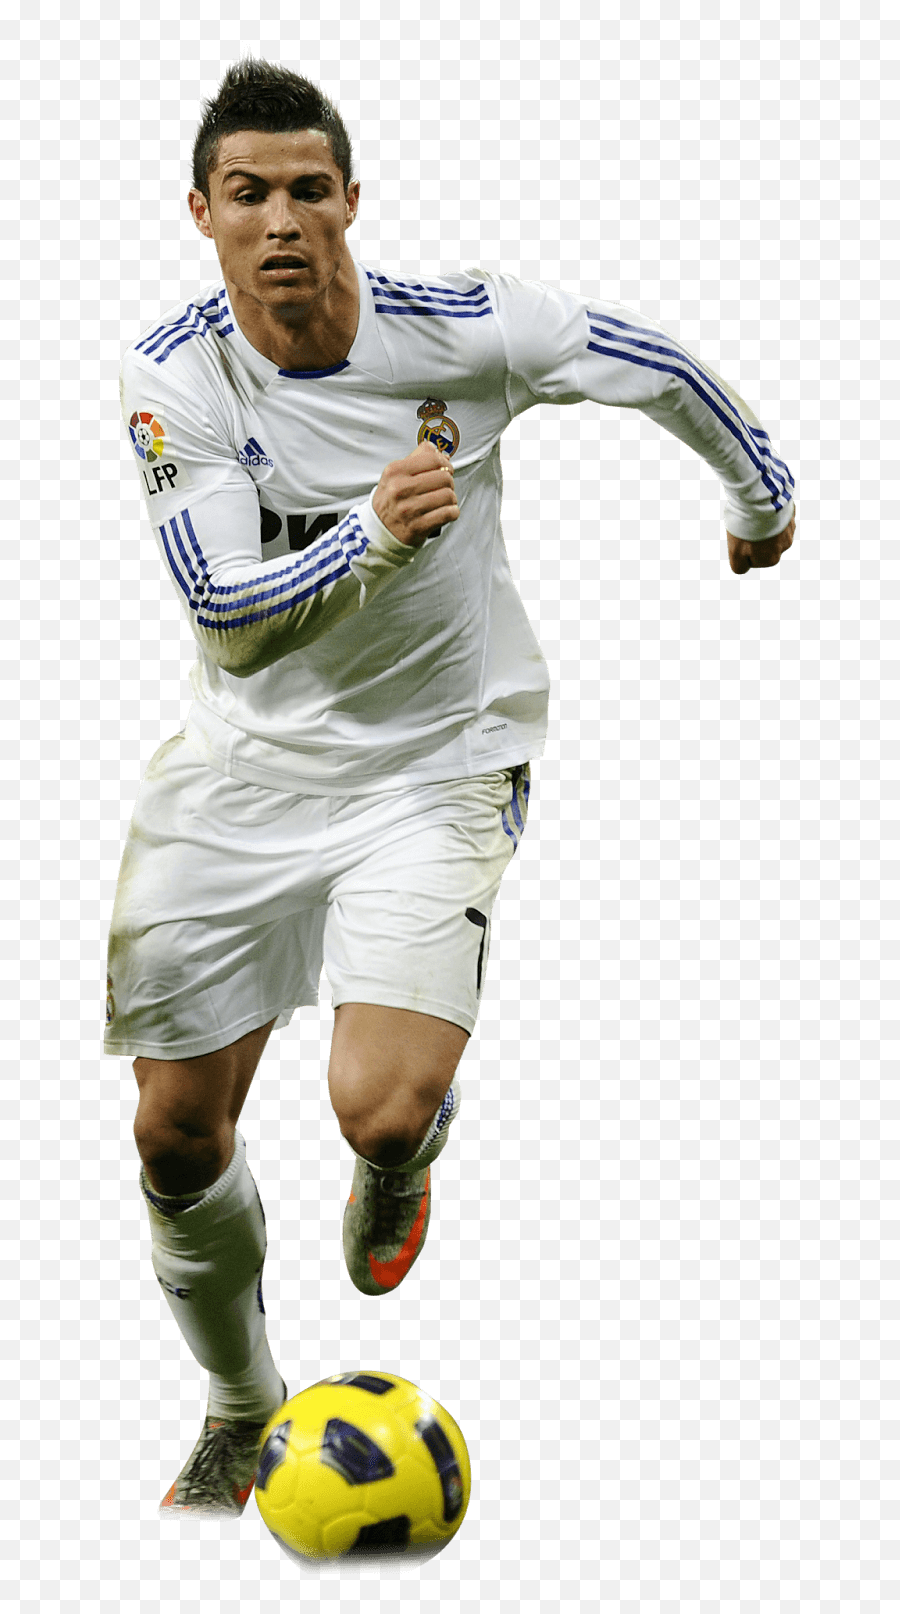 Library Of Football Player Emoji Image Library Download Png - Transparent Png Cristiano Ronaldo Png,Nfl Emoji Keyboard